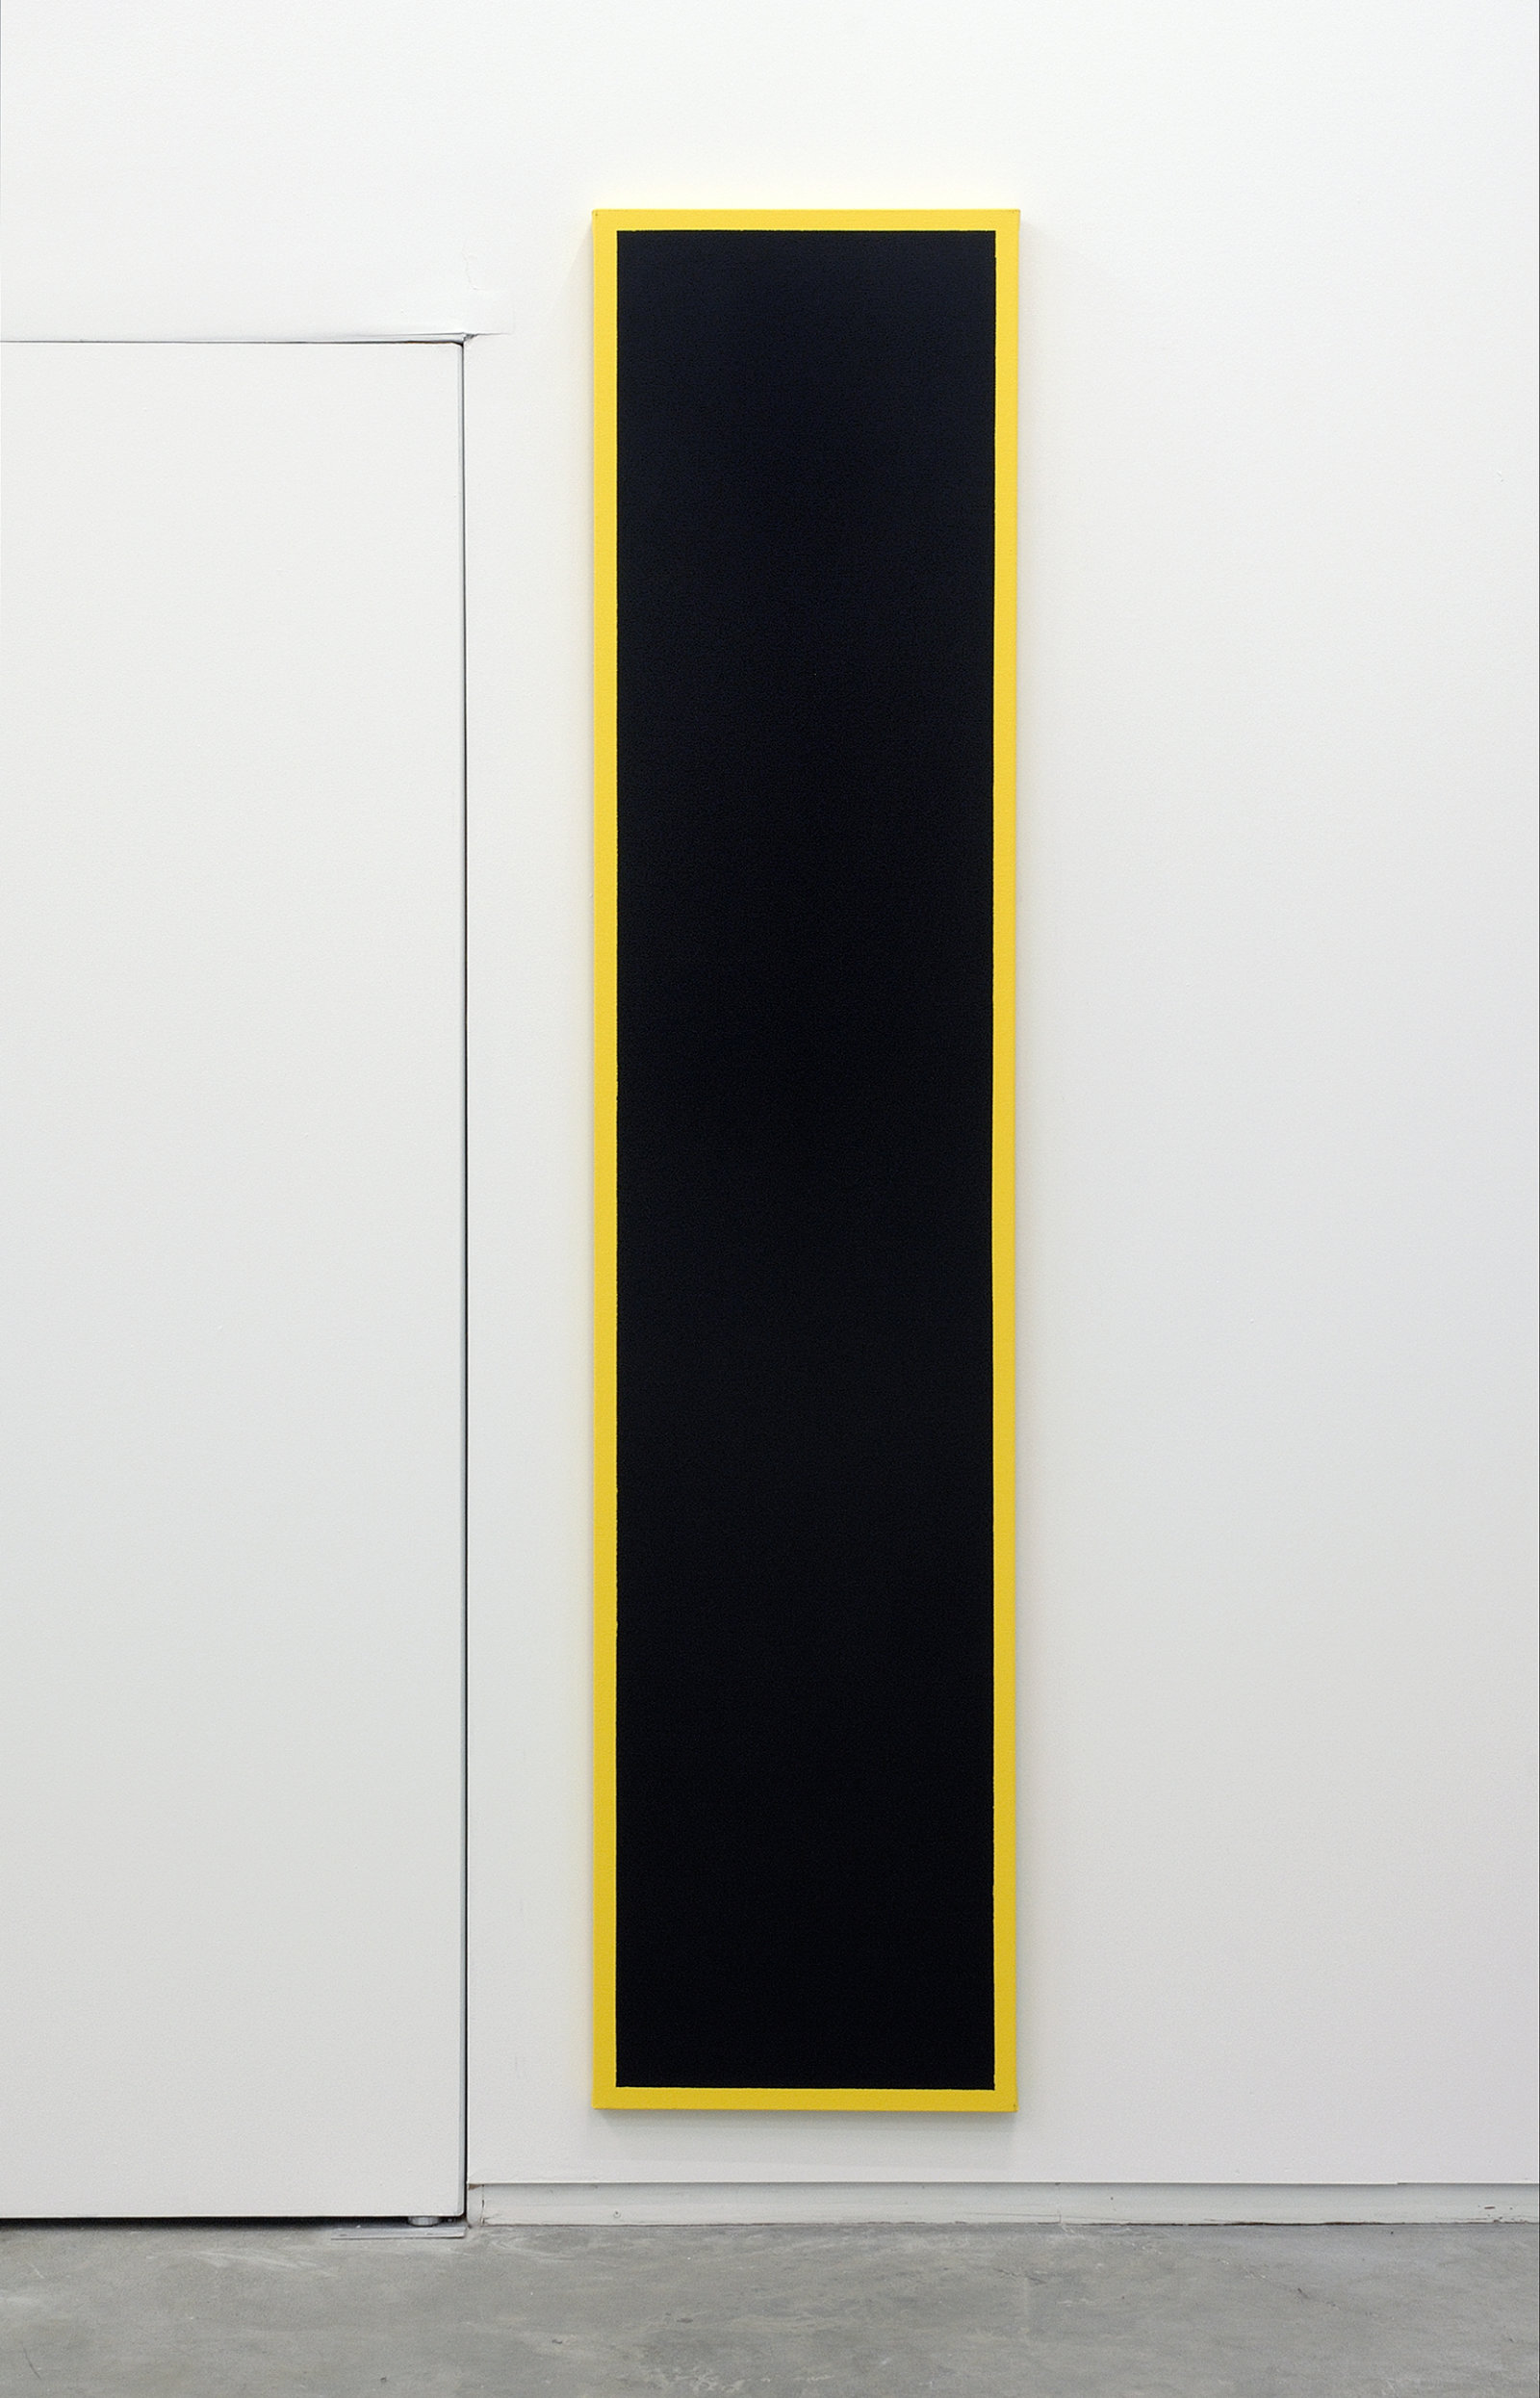 Ian Wallace, Untitled (Black Monochrome with Yellow), 1967–2007, acrylic on canvas, 90 x 20 in. (229 x 51 cm)